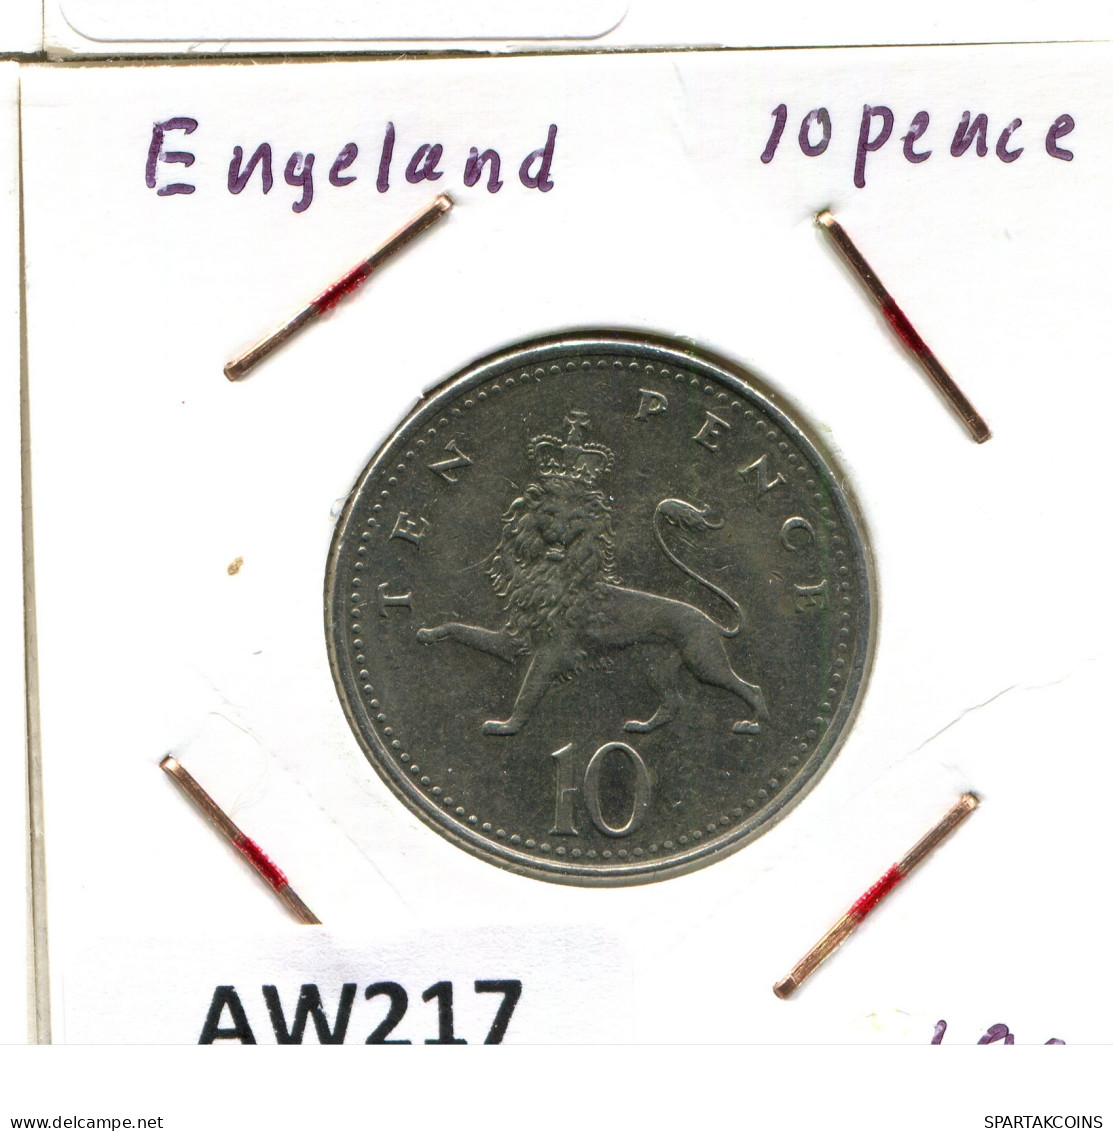 10 PENCE 1997 UK GREAT BRITAIN Coin #AW217.U - 10 Pence & 10 New Pence